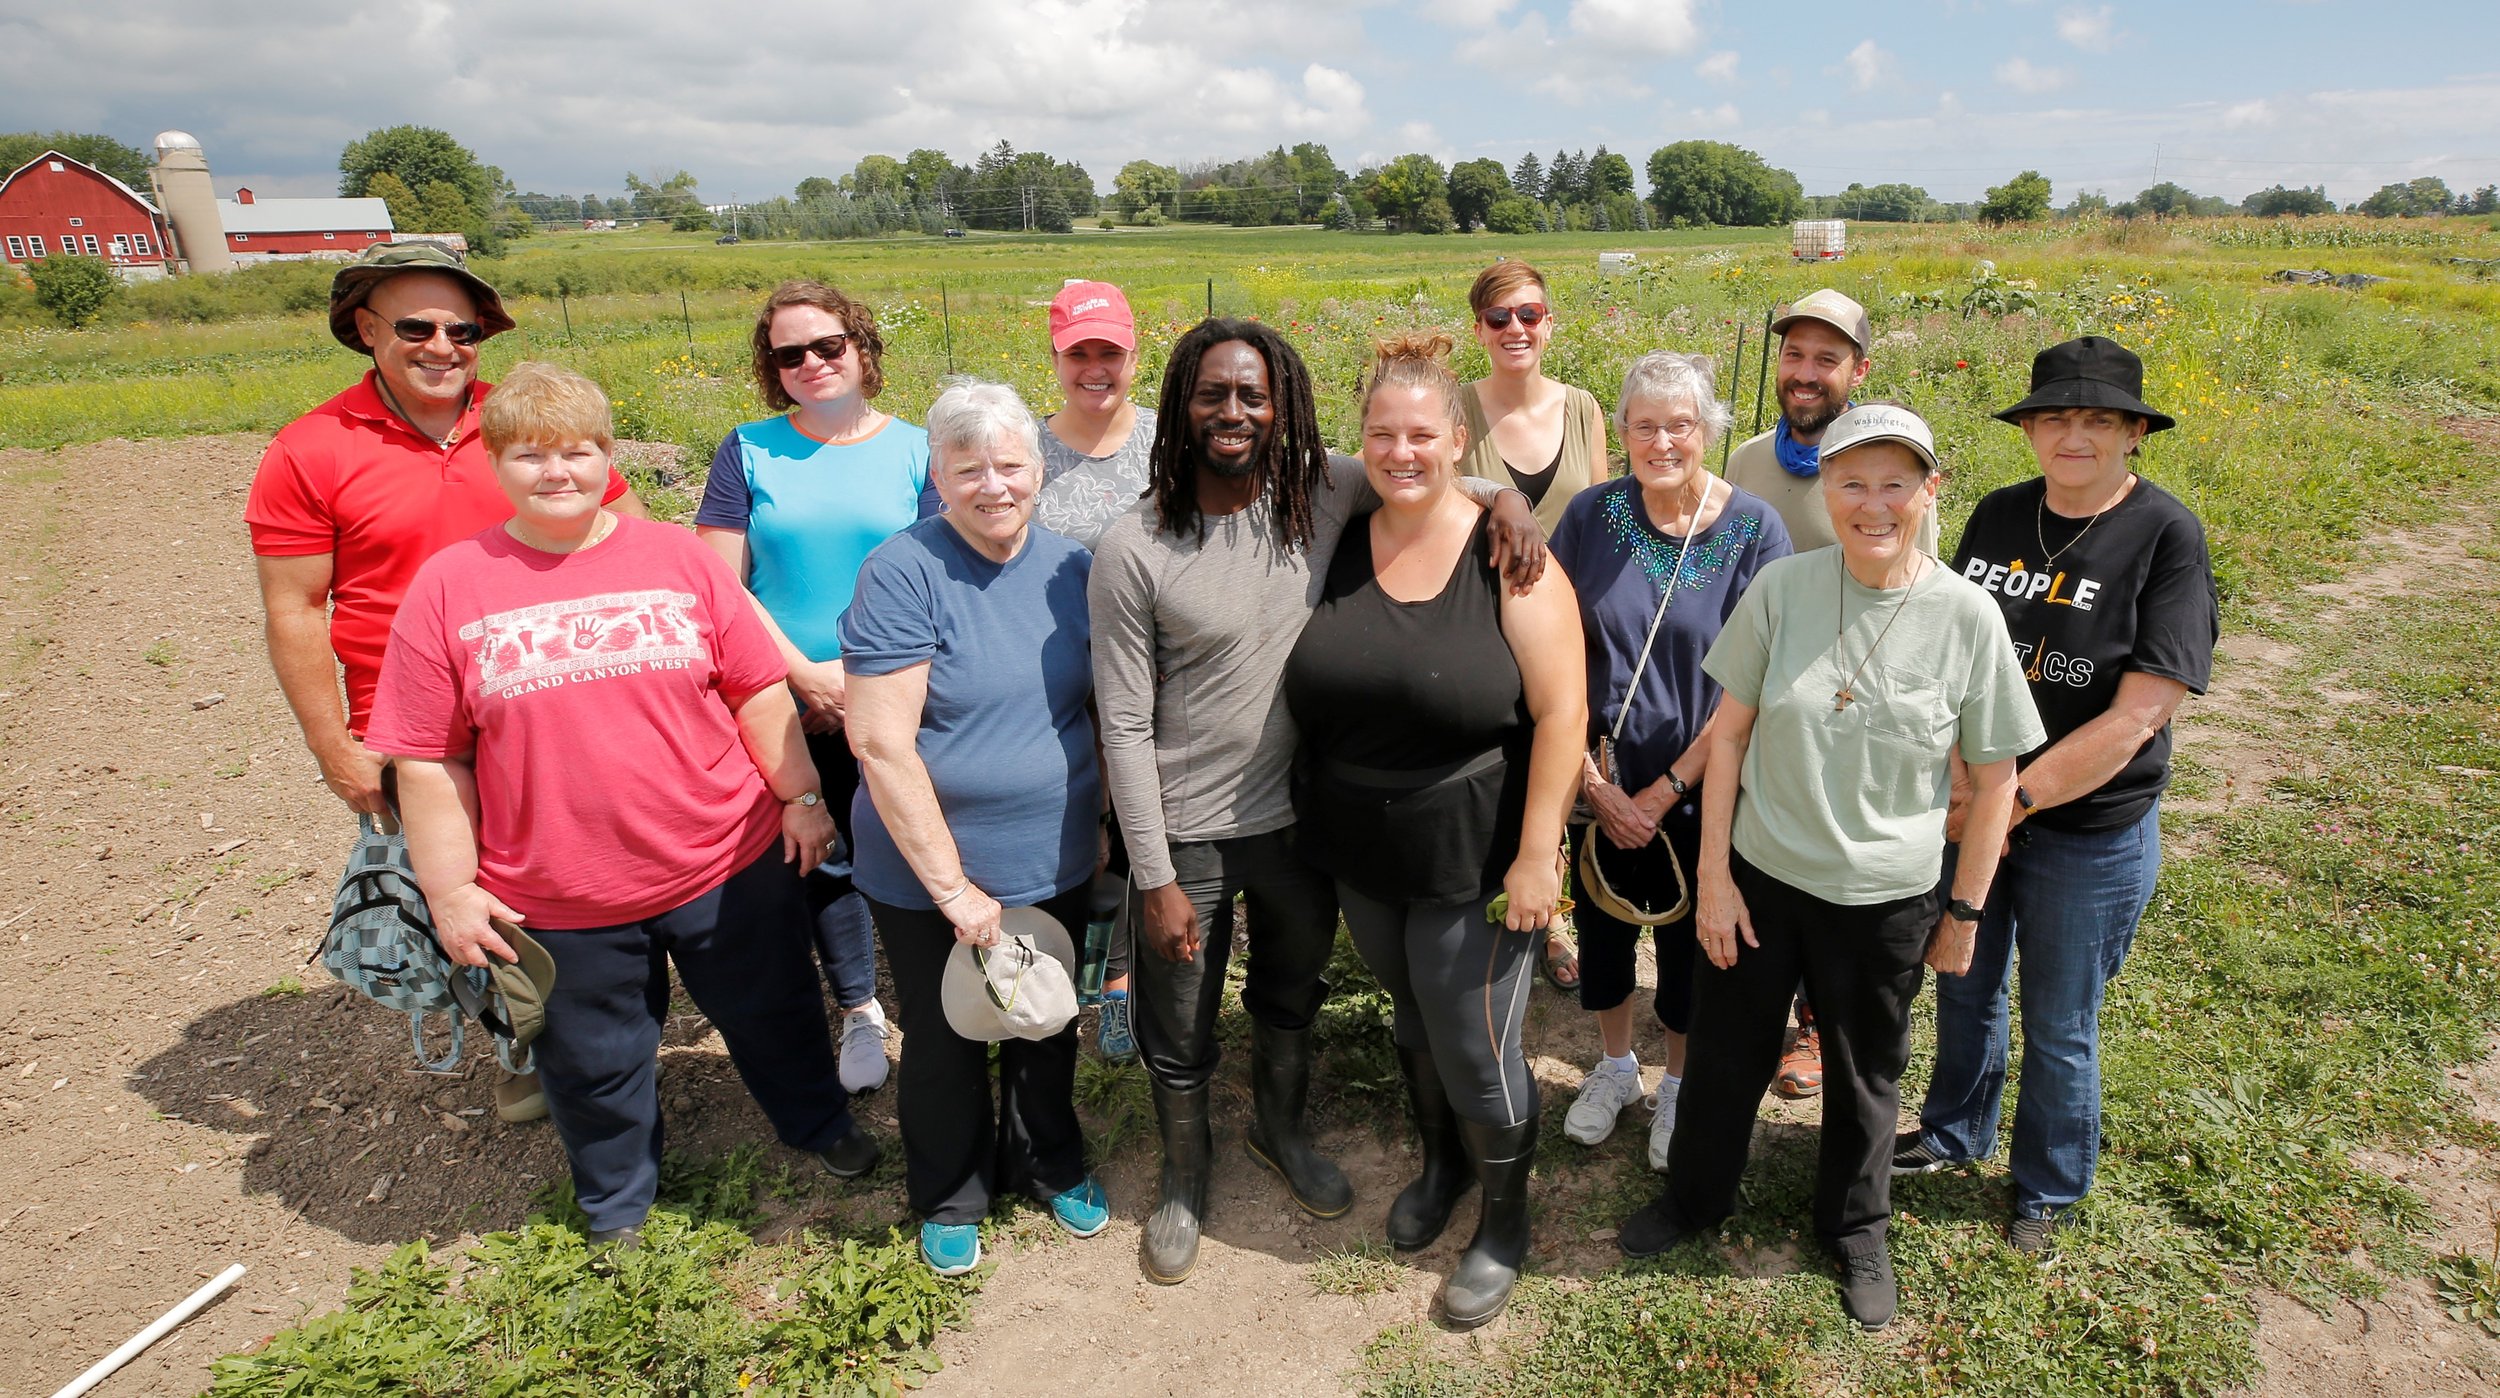 The Racine Dominicans and Martice Scales of Full Circle Healing Farm